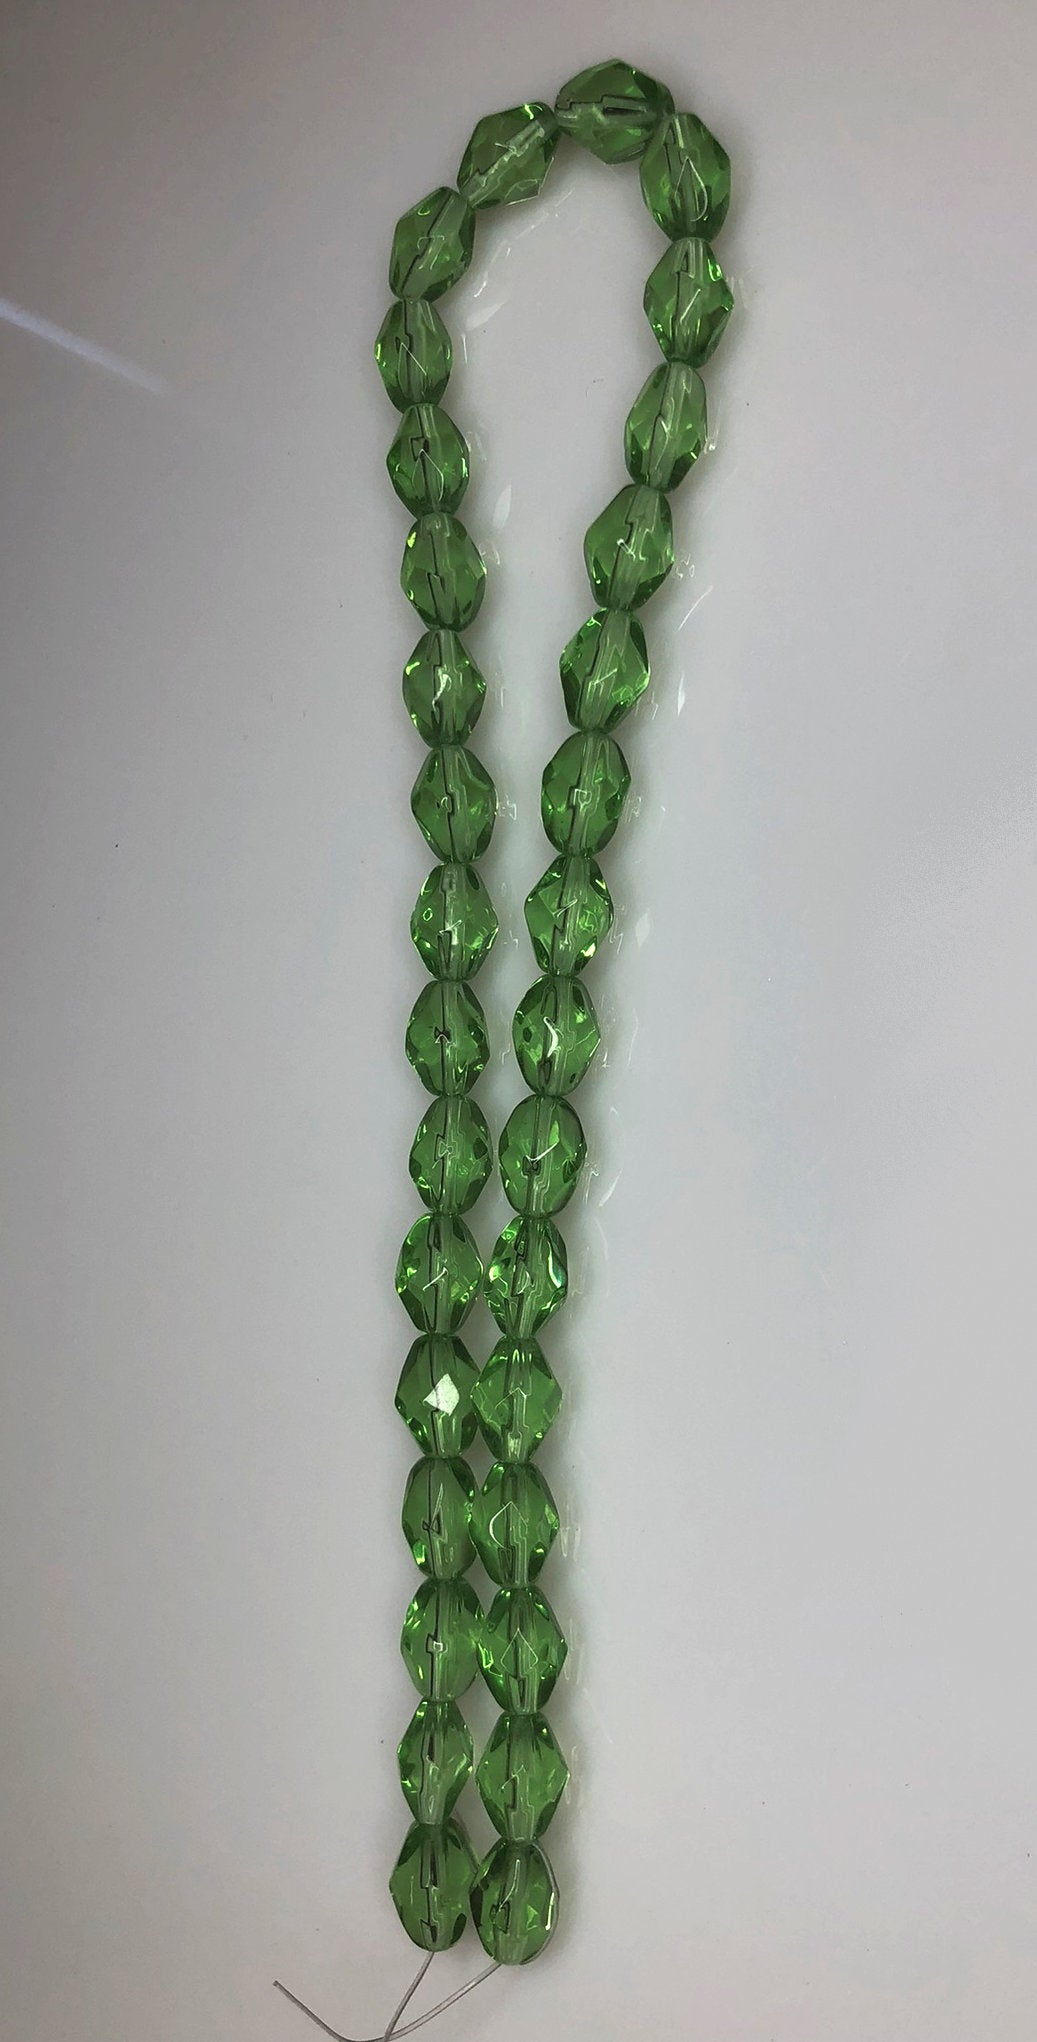 Transparent Green Faceted Oval Glass Beads, 11 x 8 mm - 32 Beads